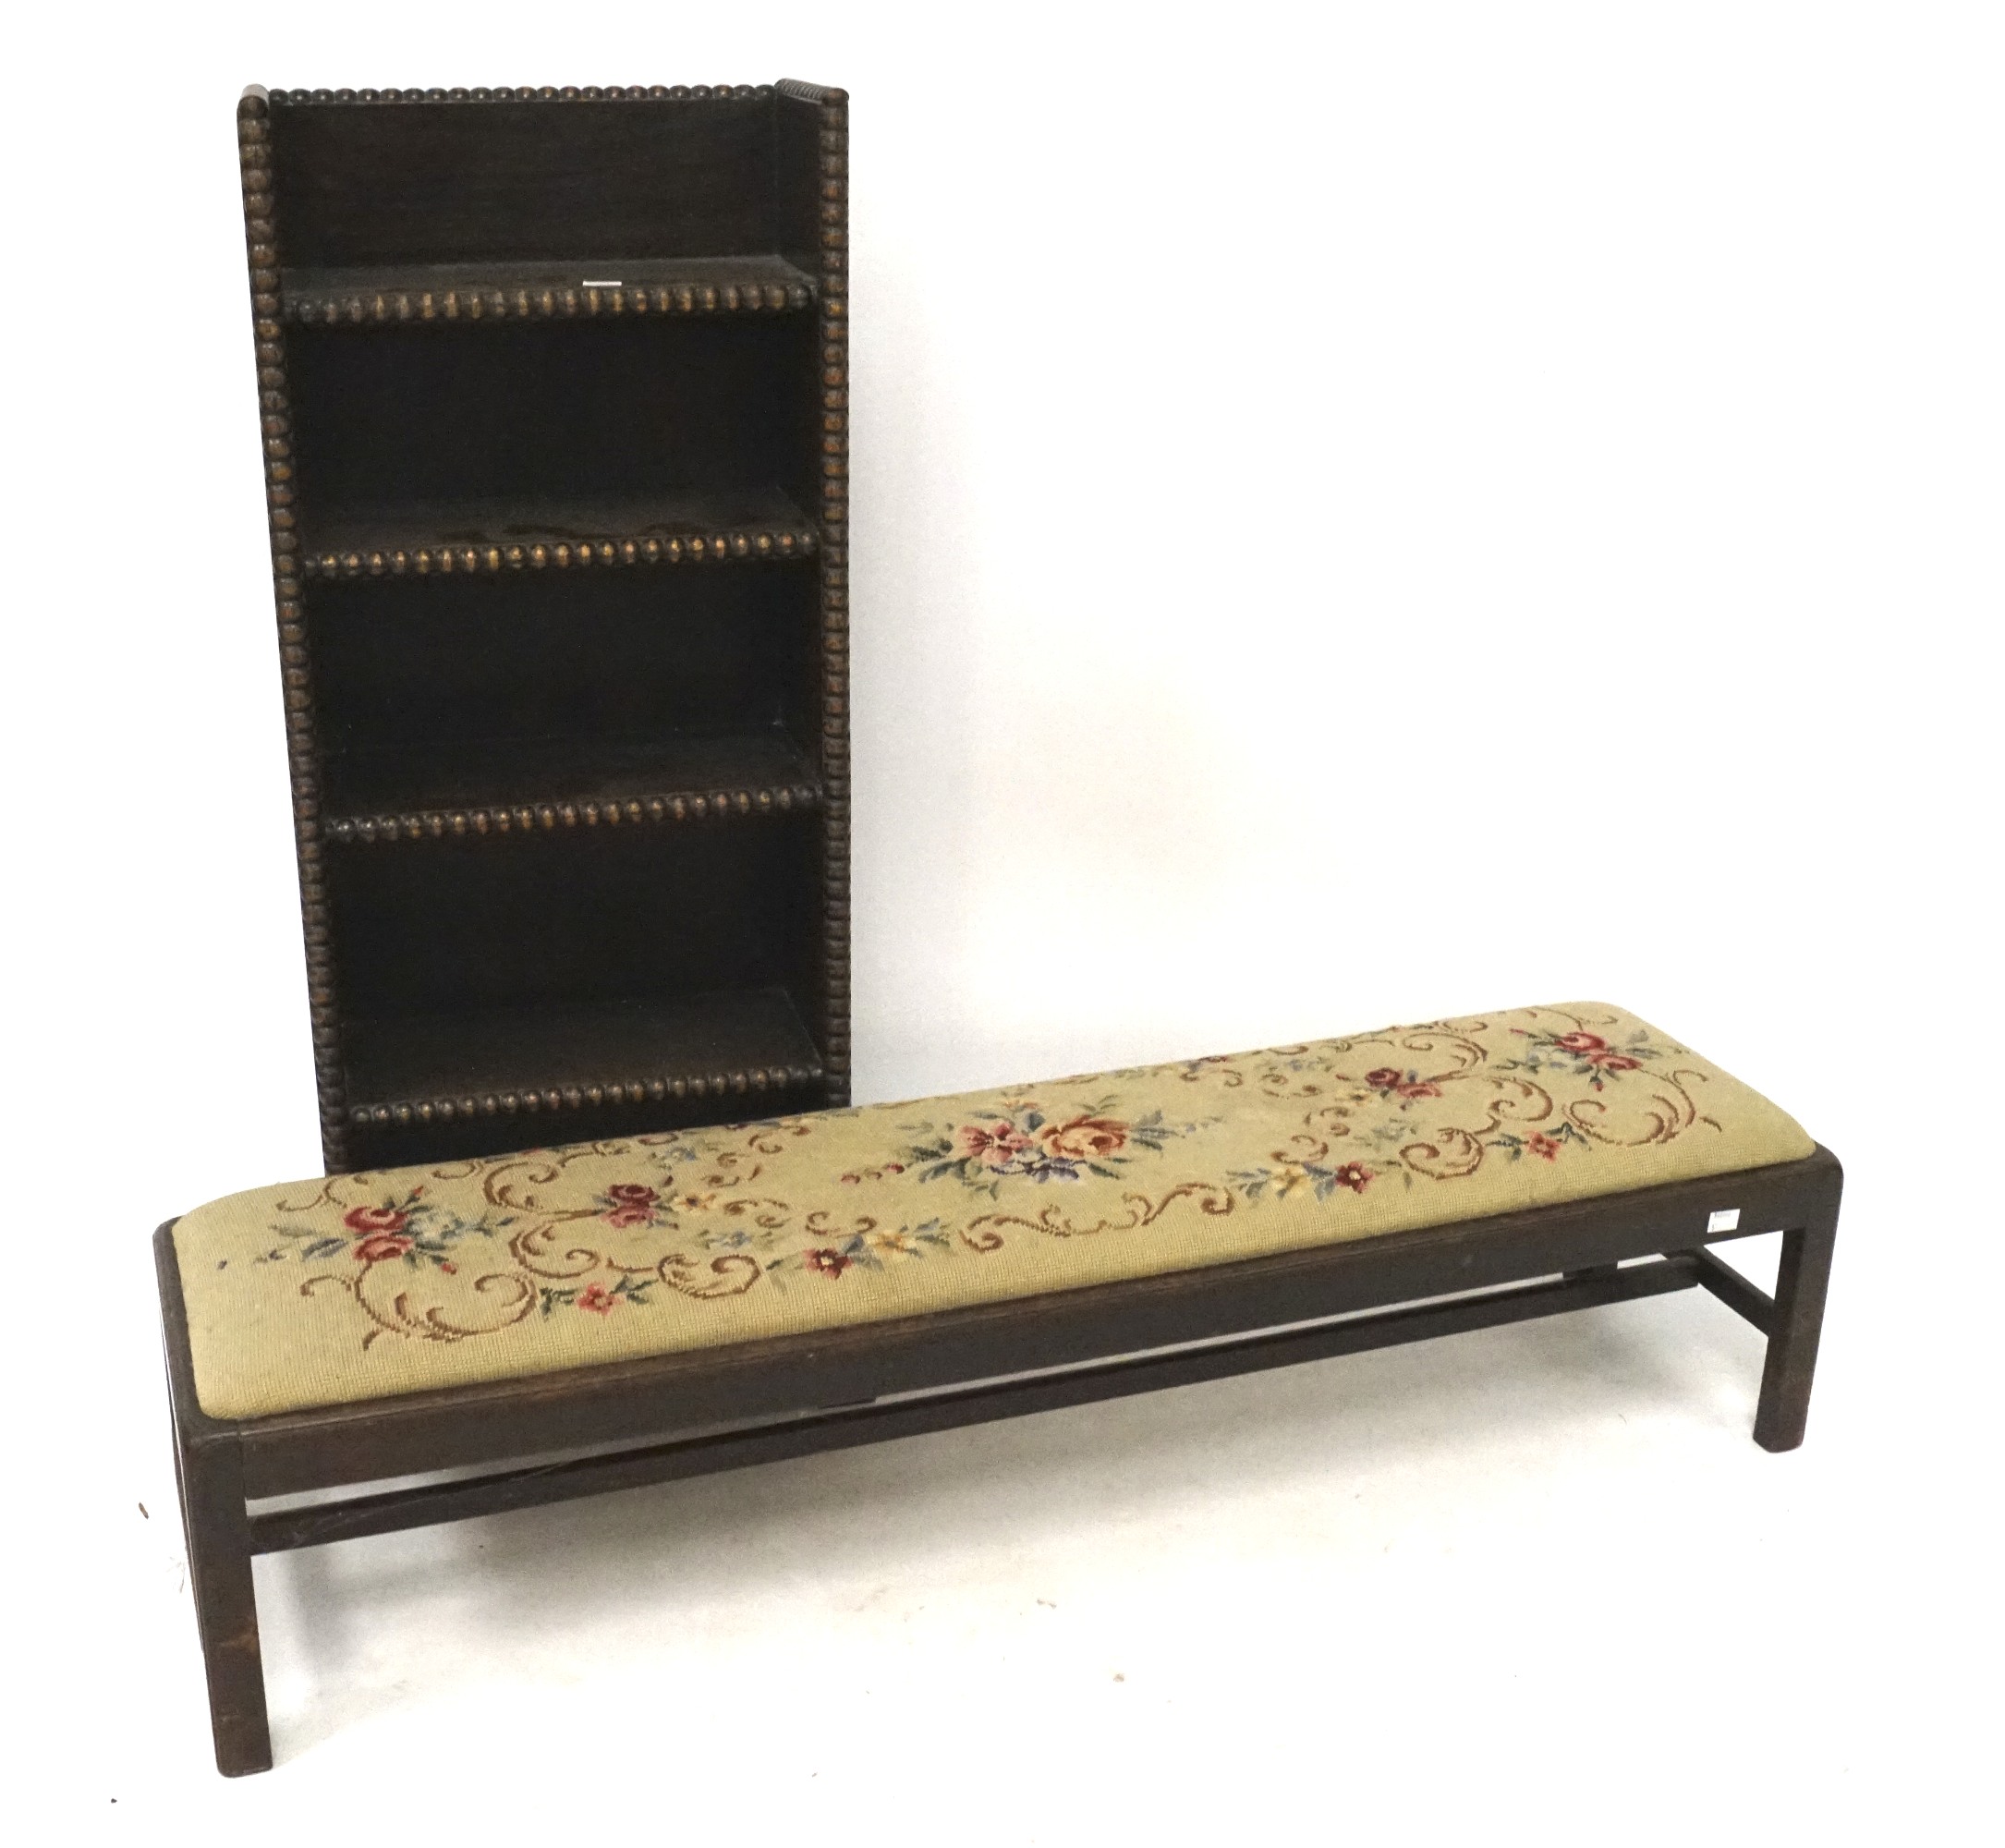 A free standing oak bookcase with beaded edges and a long bench with tapestry drop in seat.